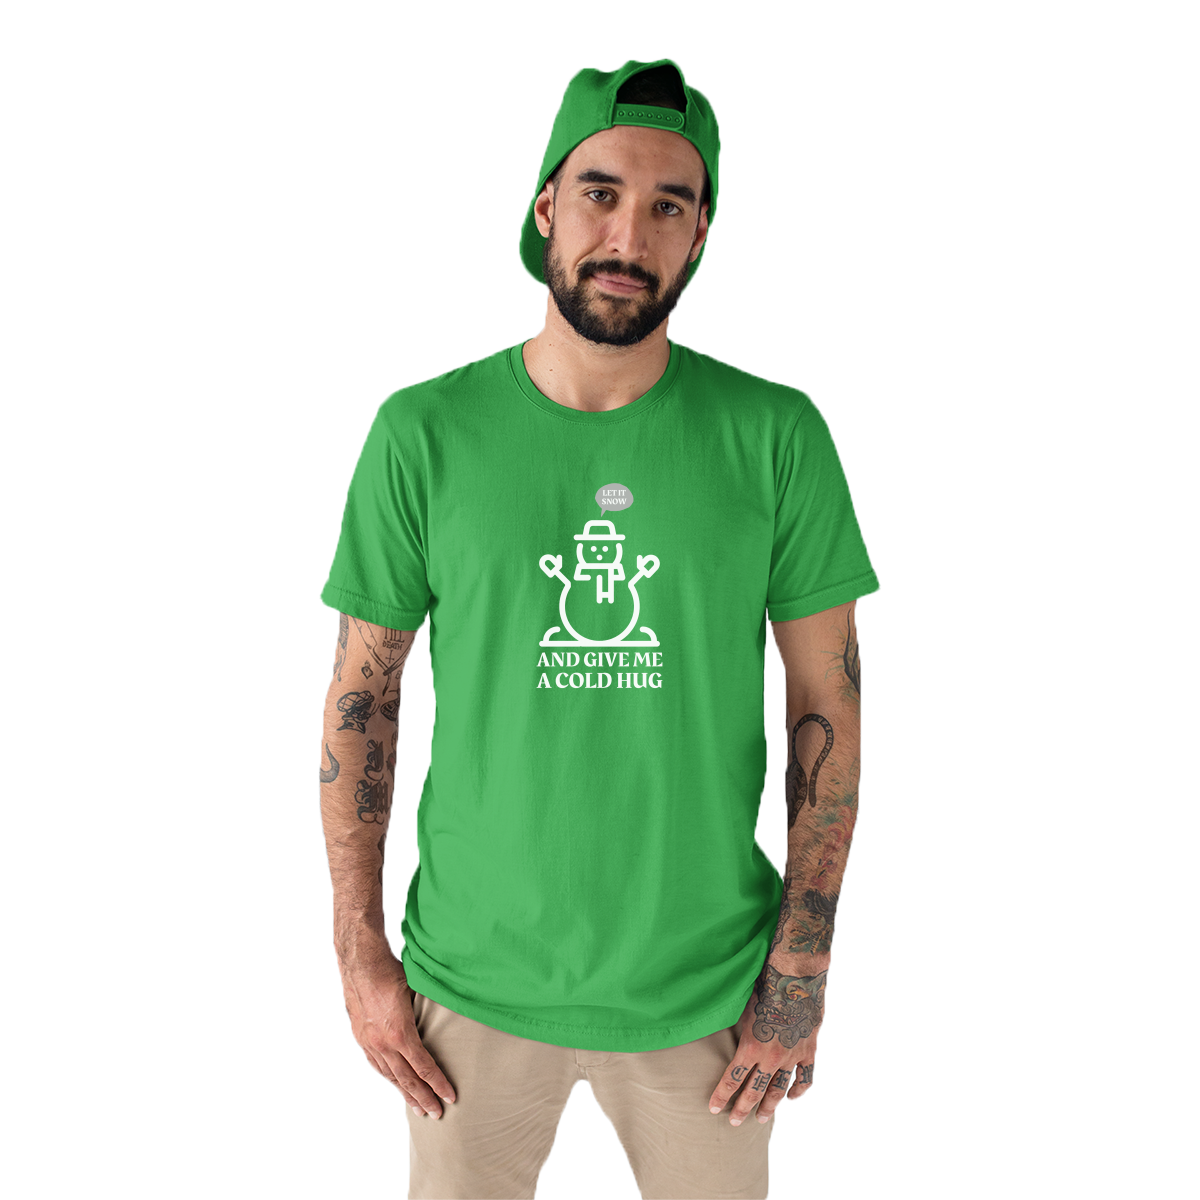 Let It Snow and Give Me a Cold Hug Men's T-shirt | Green